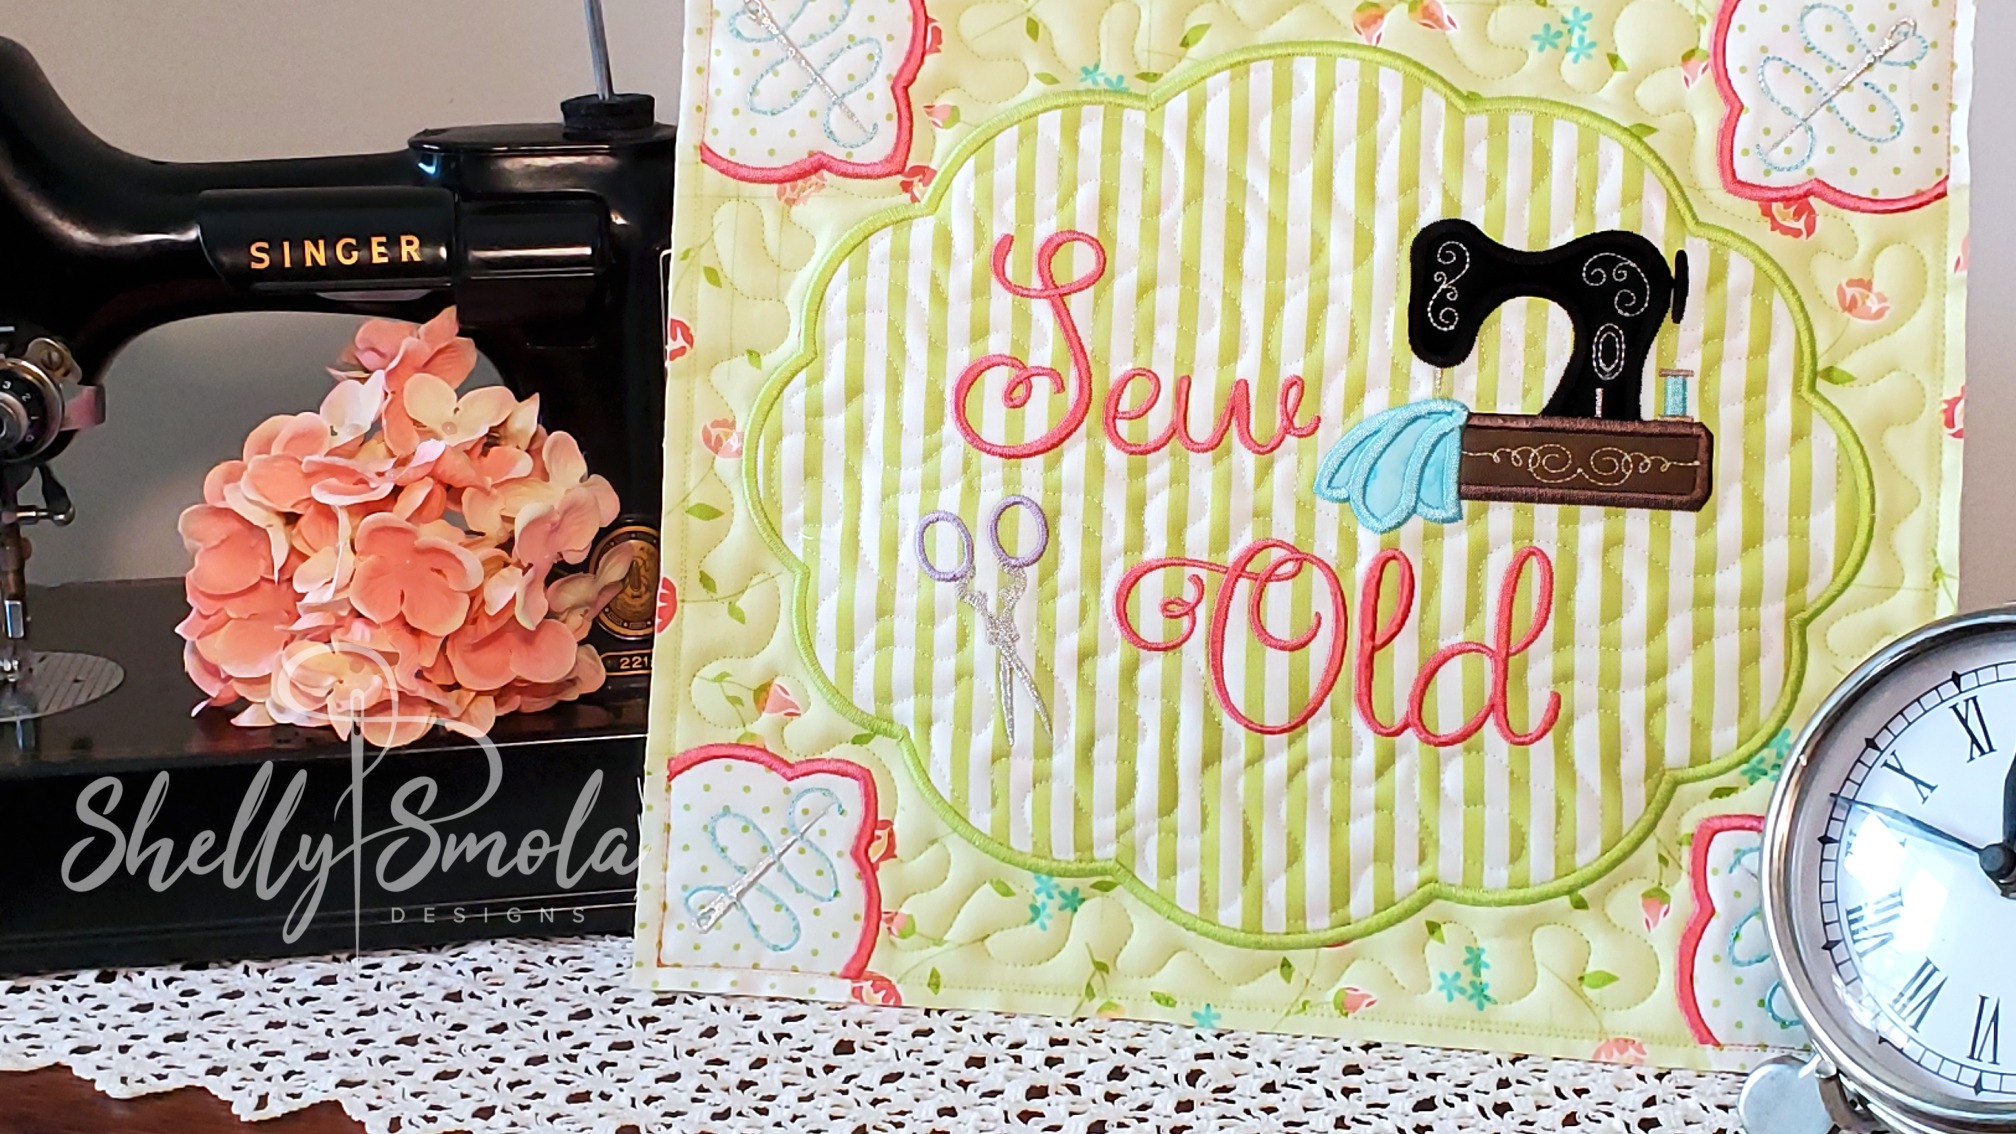 Sew Crazy - Sew Old Quilt Block by Shelly Smola